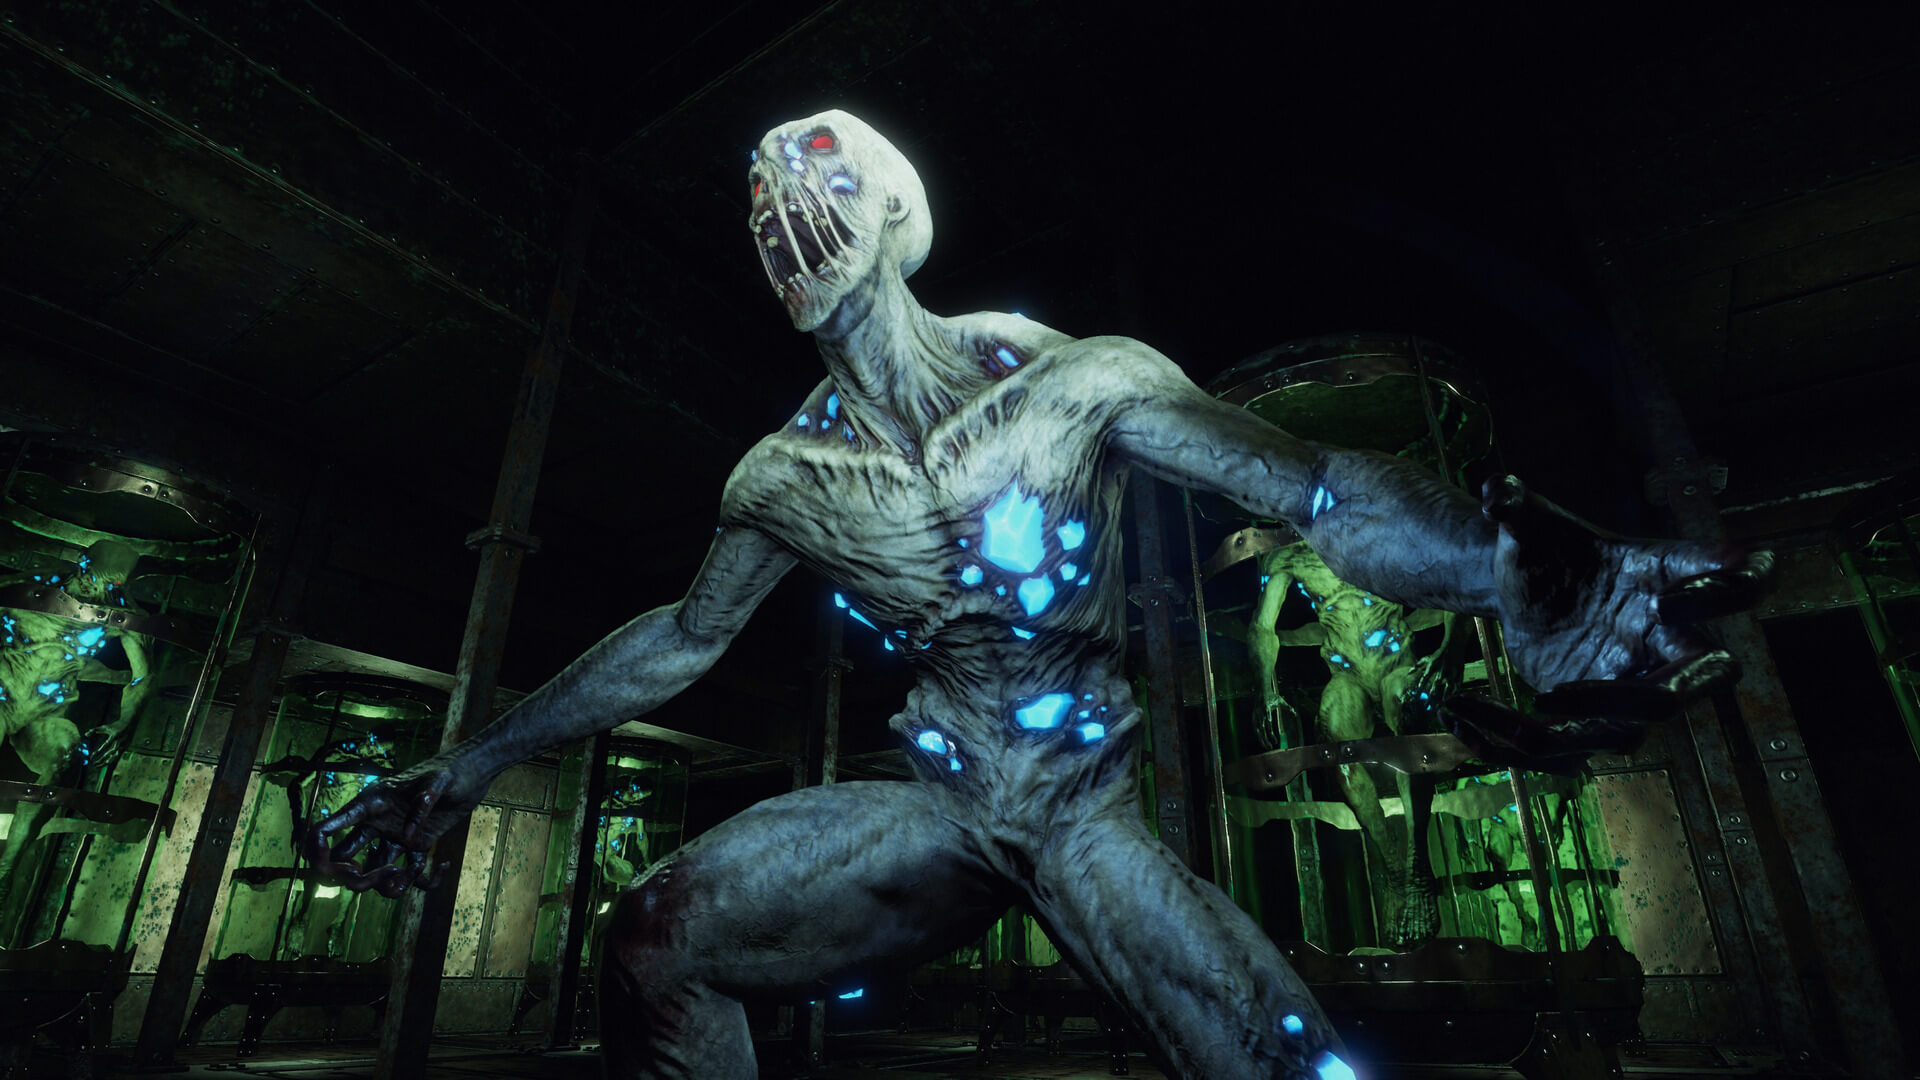 Vaporum: Lockdown is a first-person grid-based single ...